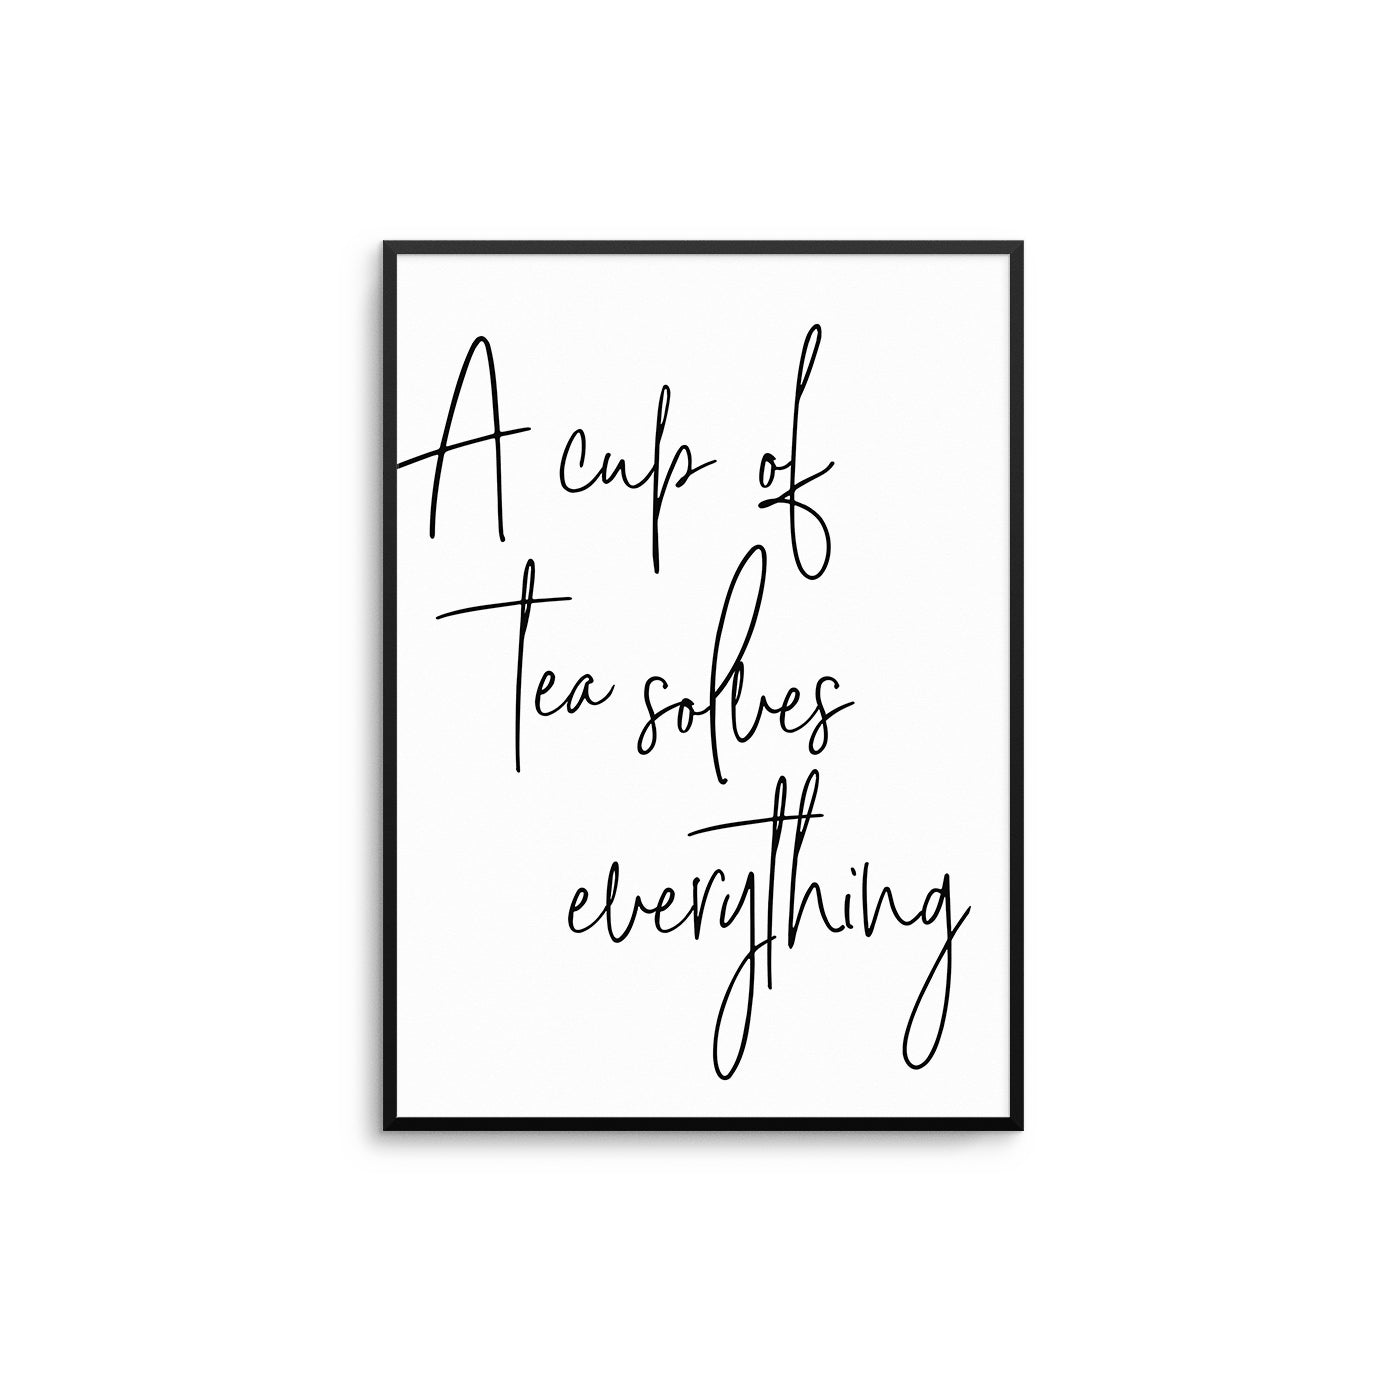 A Cup Of Tea Solves Everything - D'Luxe Prints